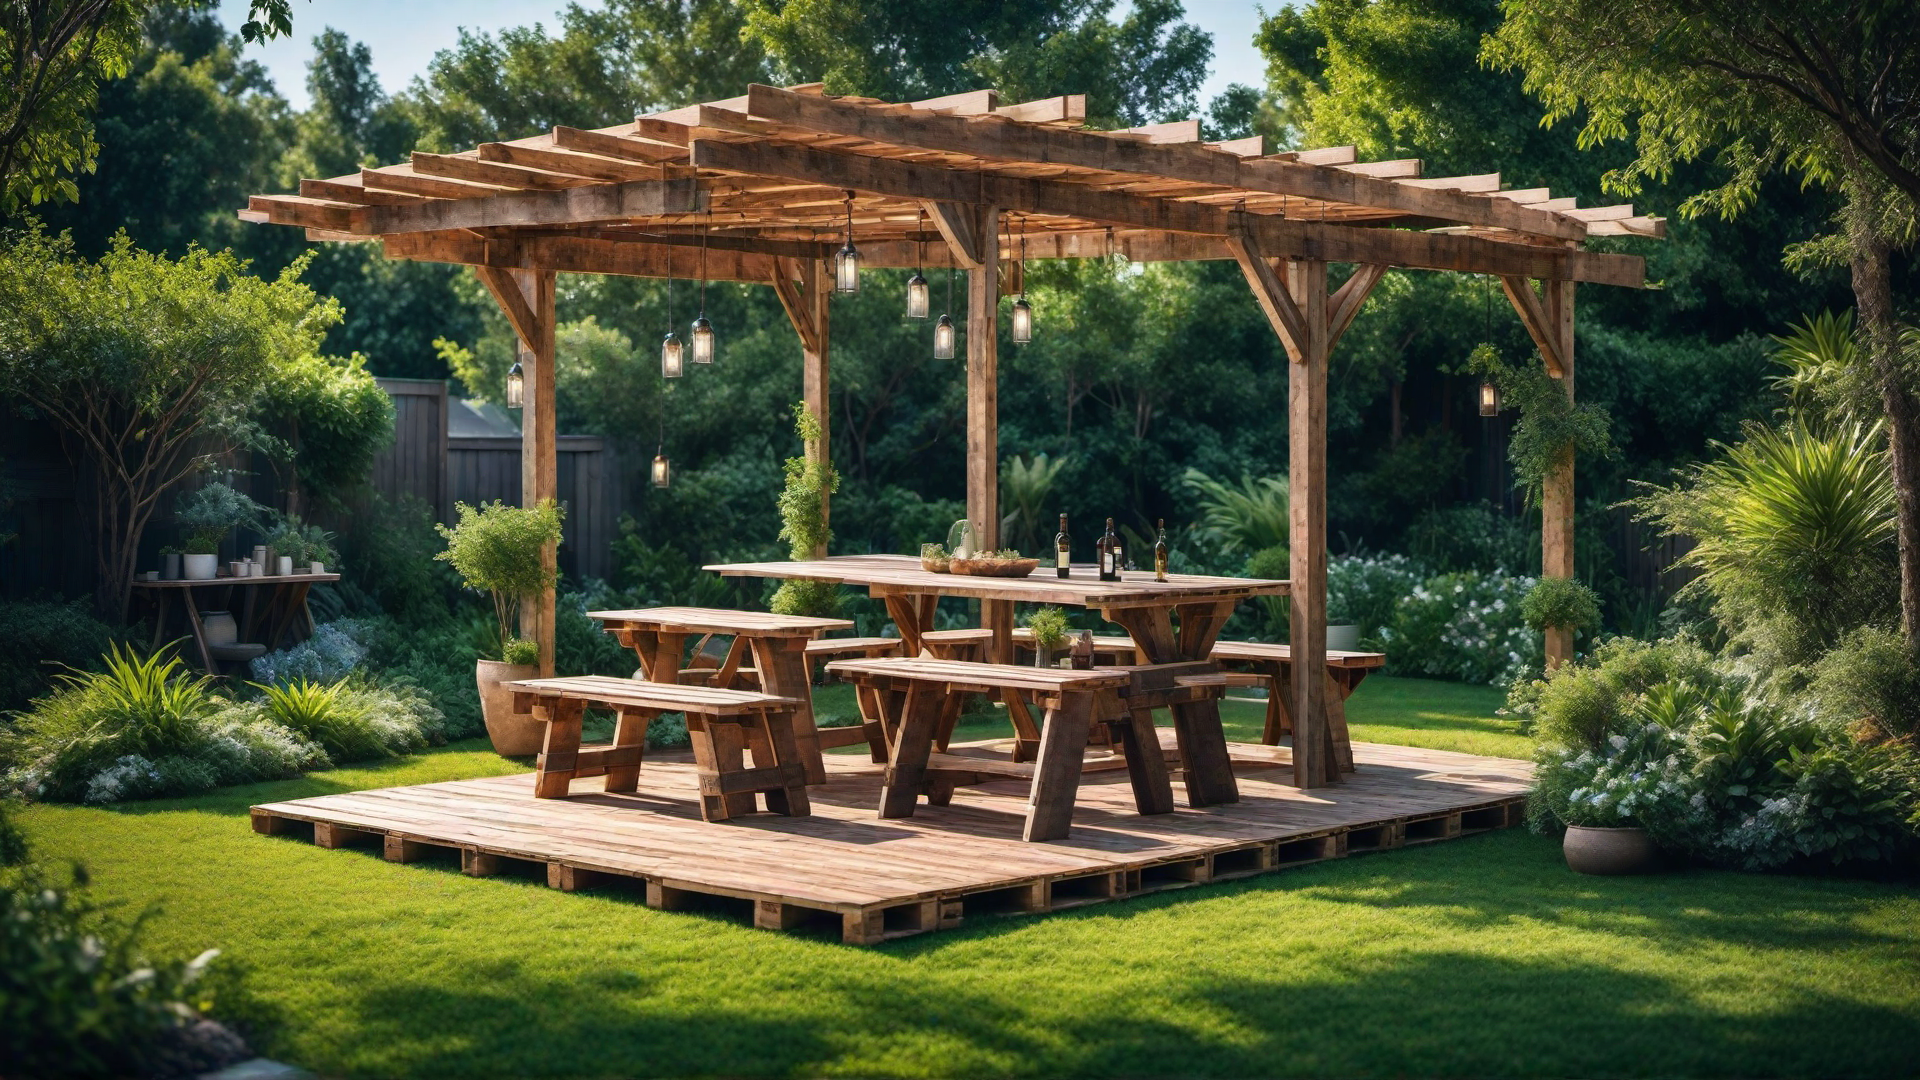 Pallet Picnic Shelter with Shaded Seating